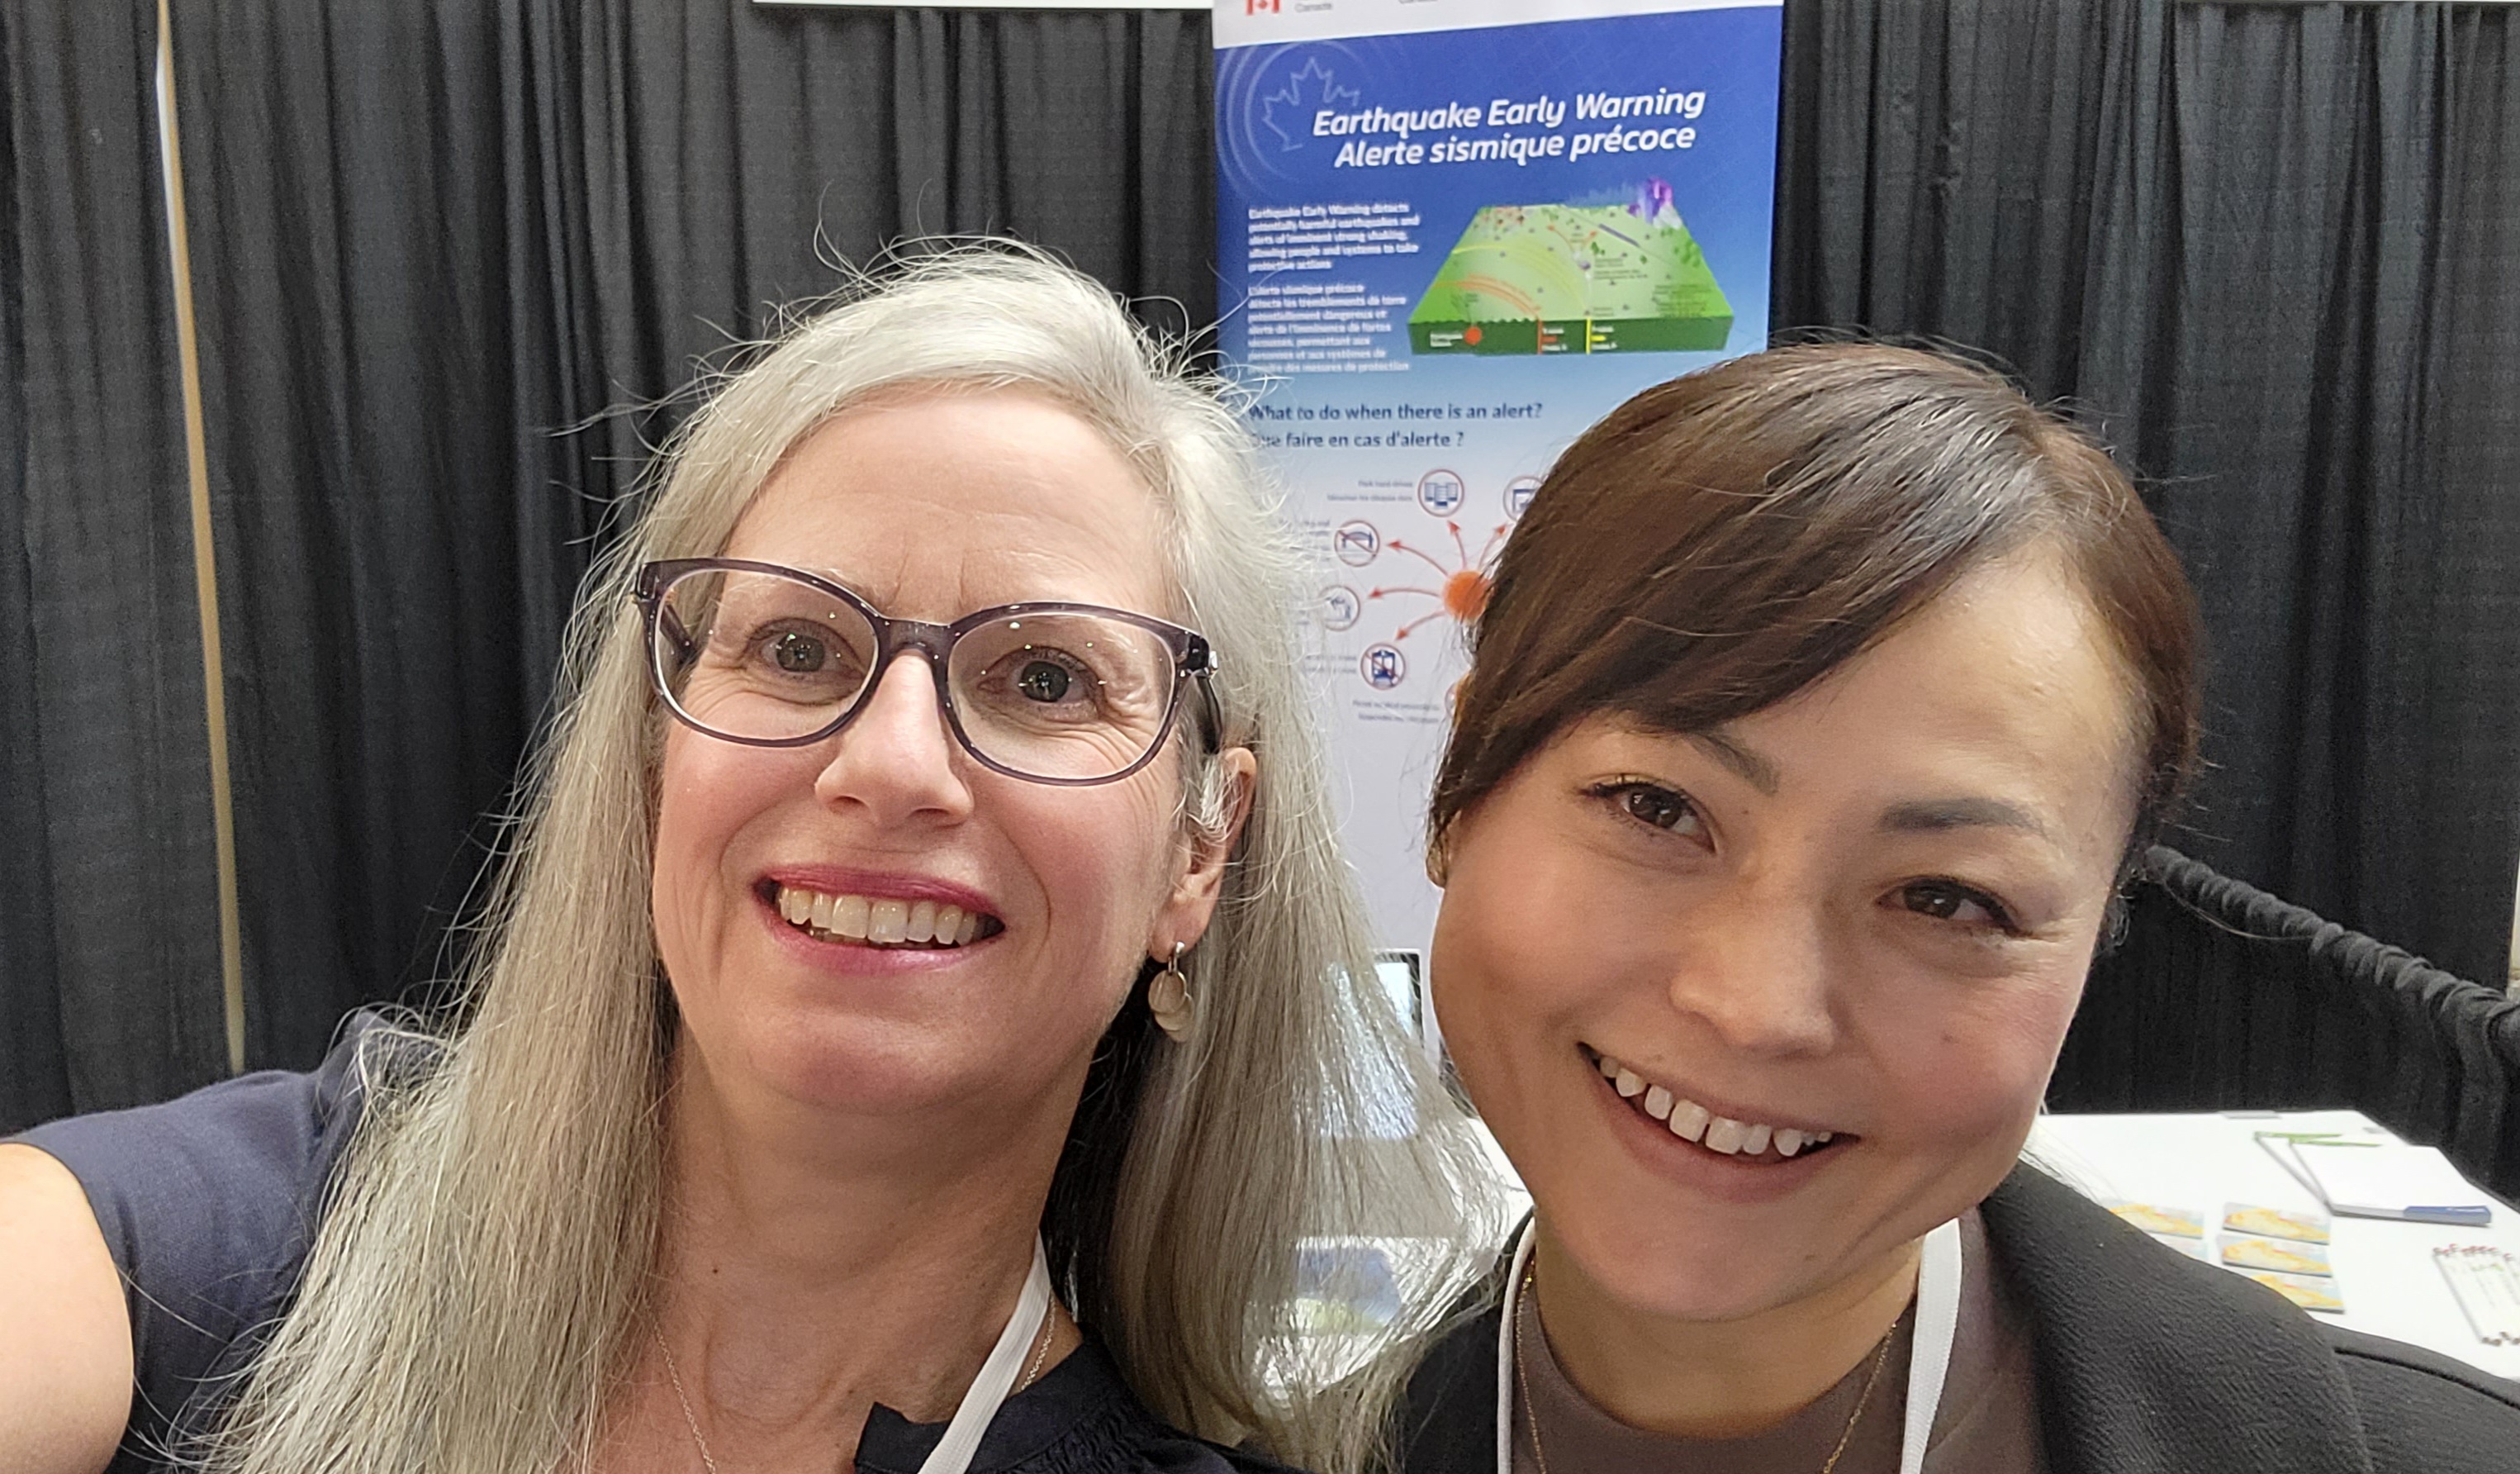 Alison and Megumi at NRCan booth